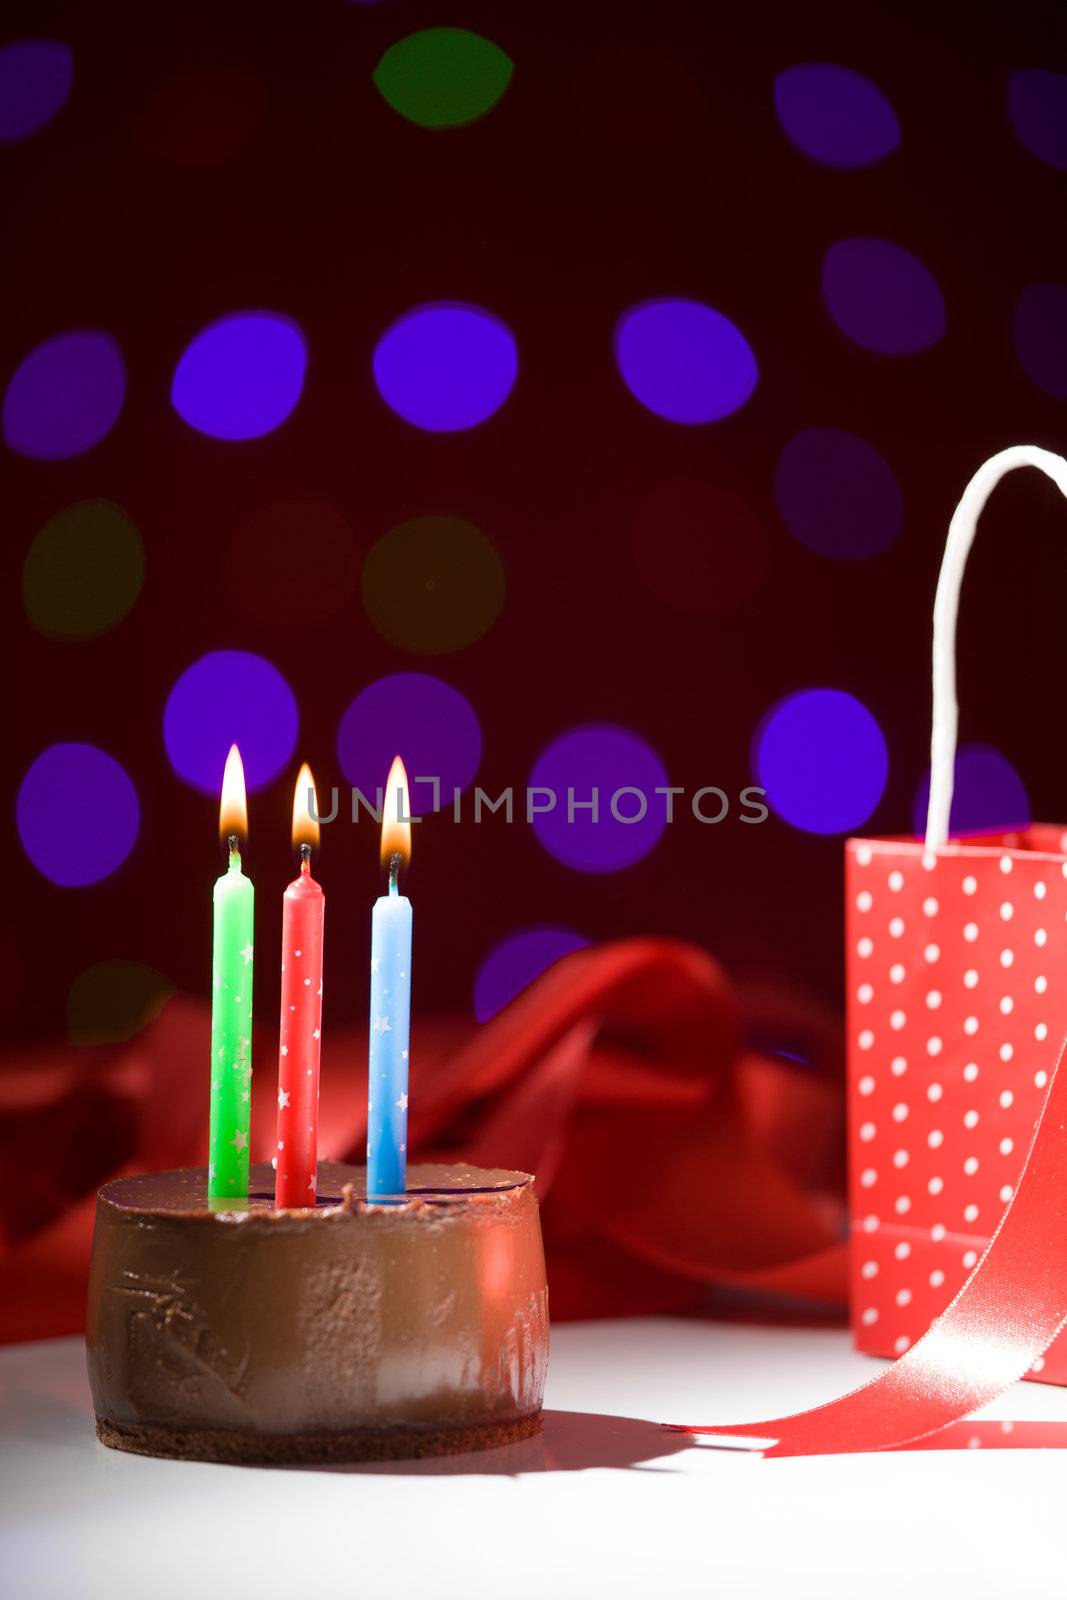 happy birthday cake shot on a red blurred background with candles